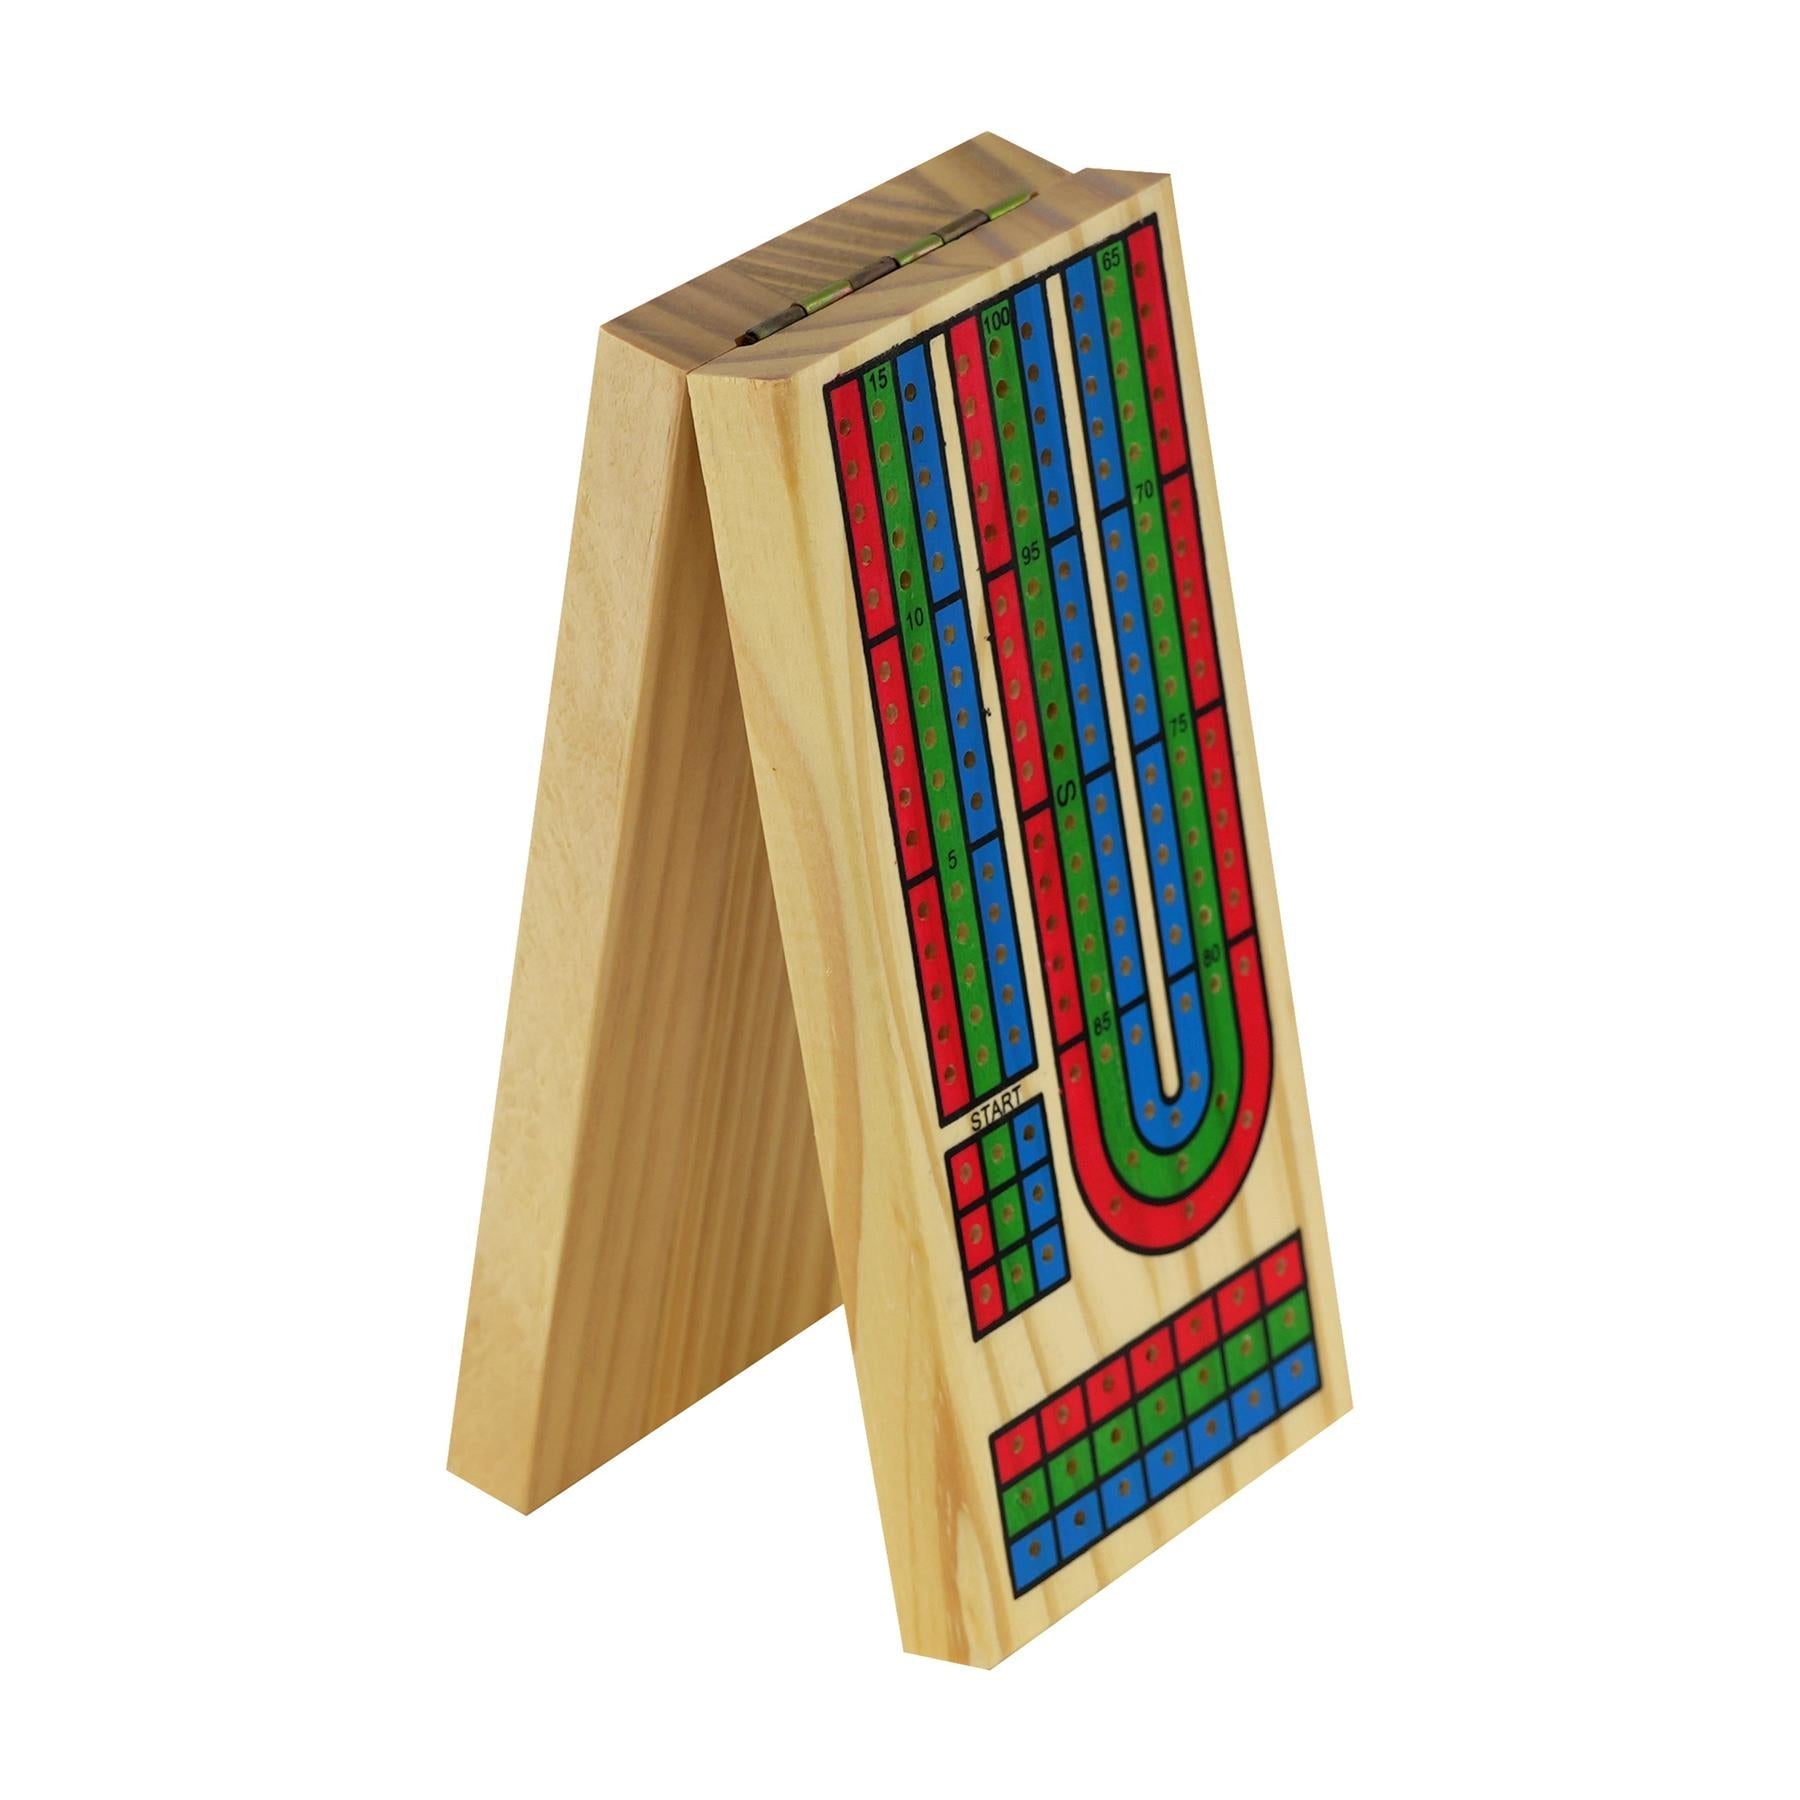 The Magic Toy Shop Cribbage Board Game Classics Wooden Cribbage Board & Playing Cards